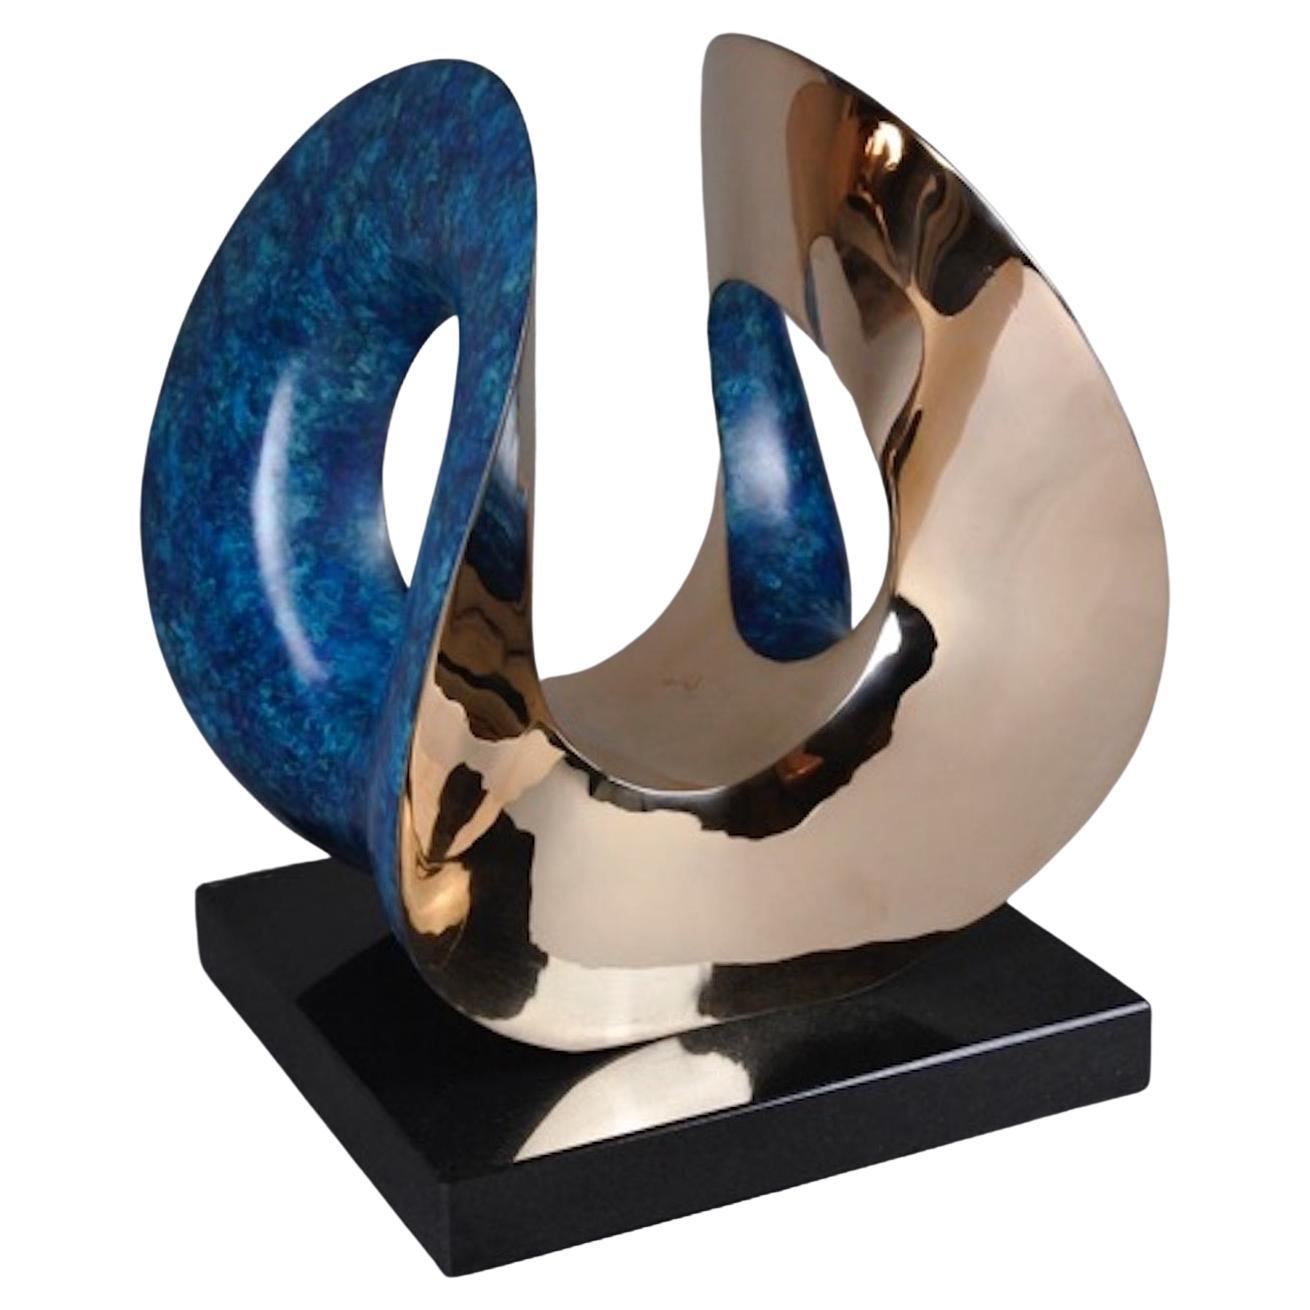 Bronze tabletop sculpture that pays tribute to Naum Gabo and the Constructivists